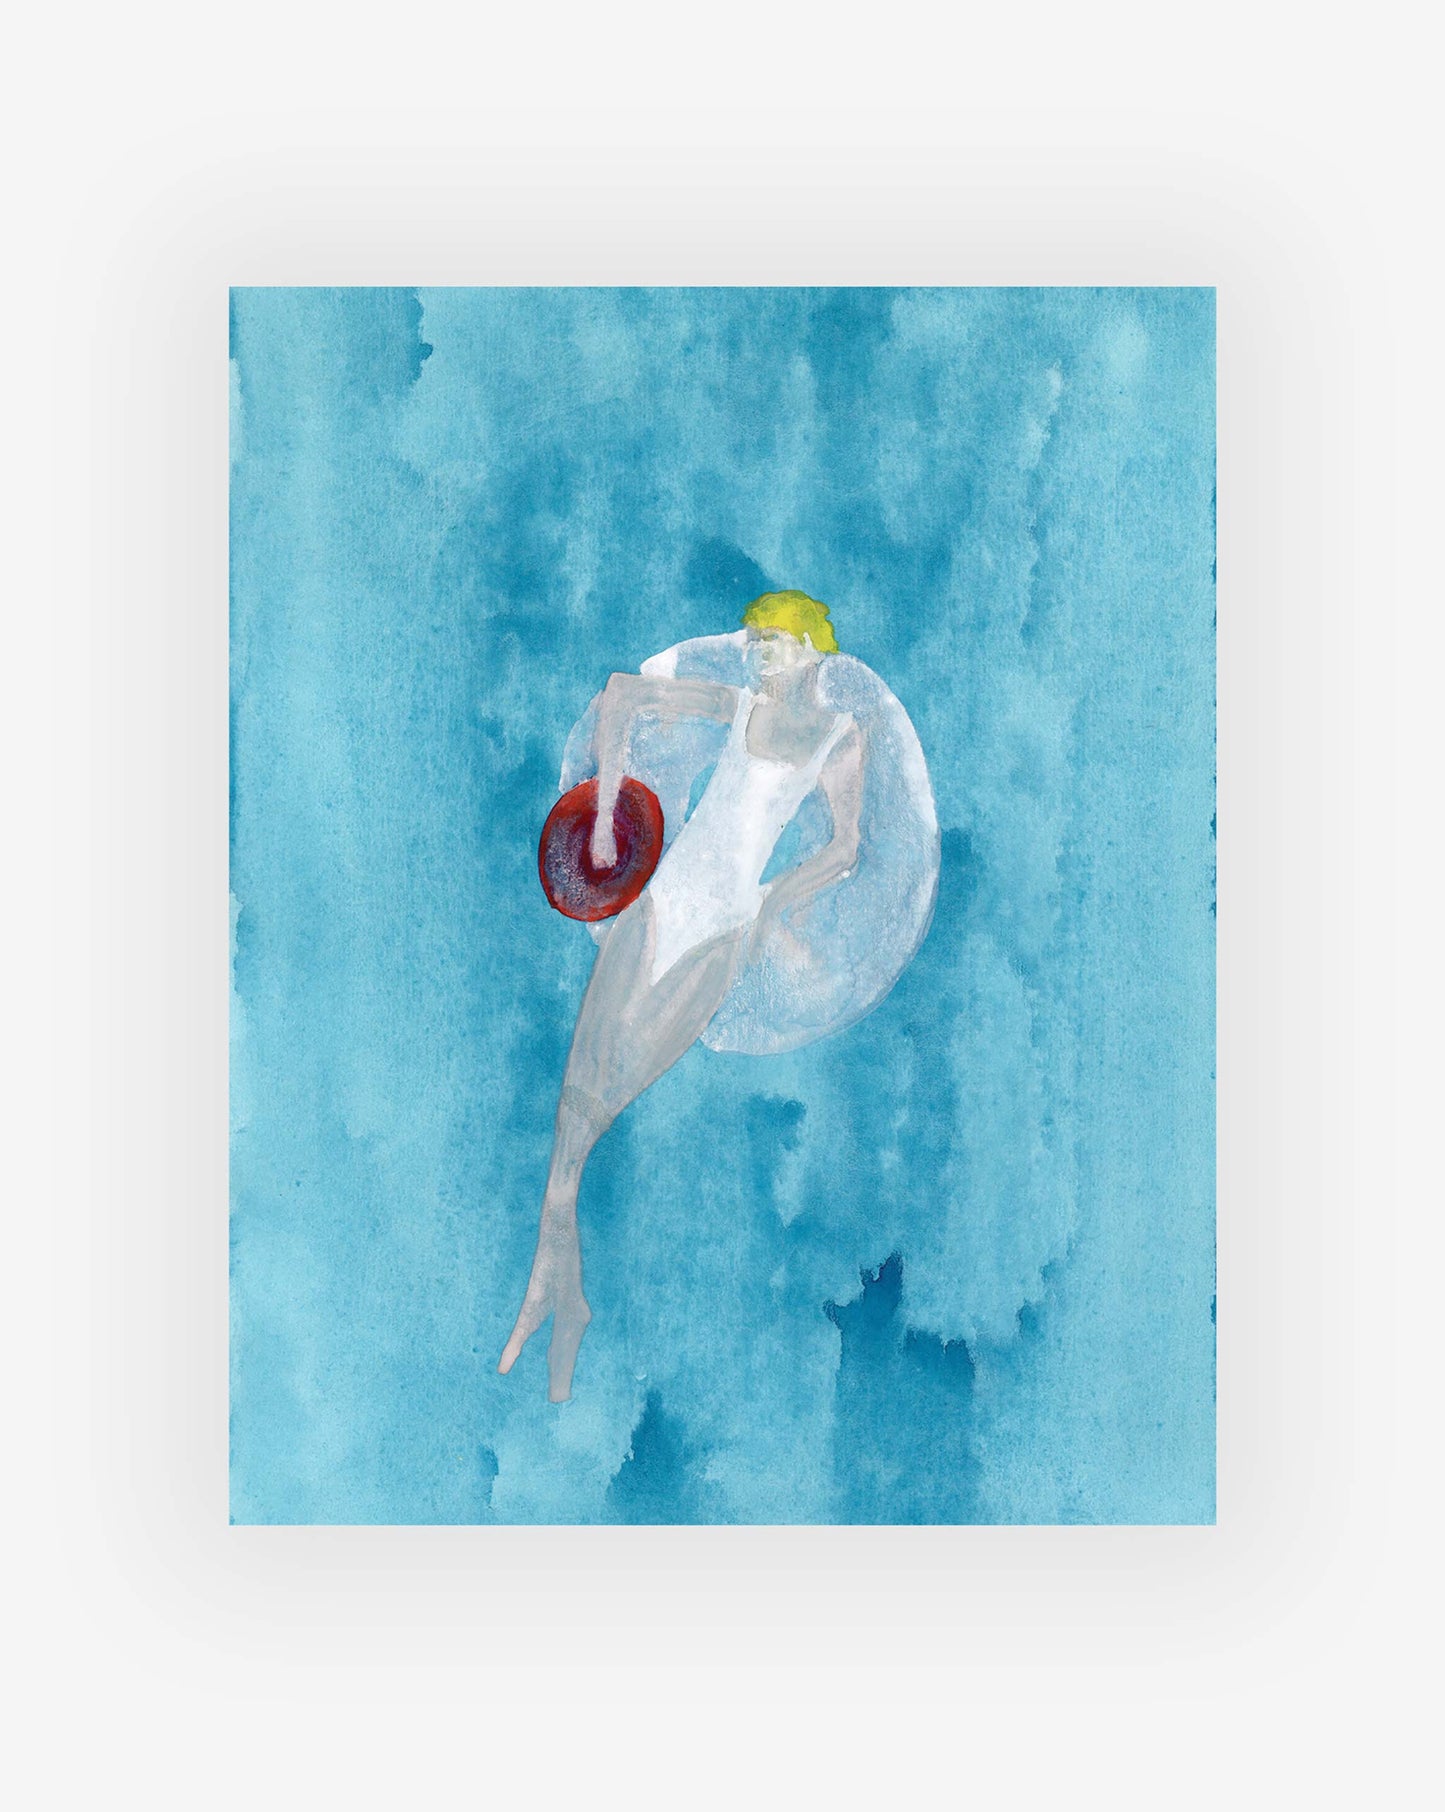 A watercolor painting by artist Shanan Campanaro shows a person in a swimsuit floating on a pool ring in blue water with a red circular object, embodying her signature style and original artworks, White Donut Print.